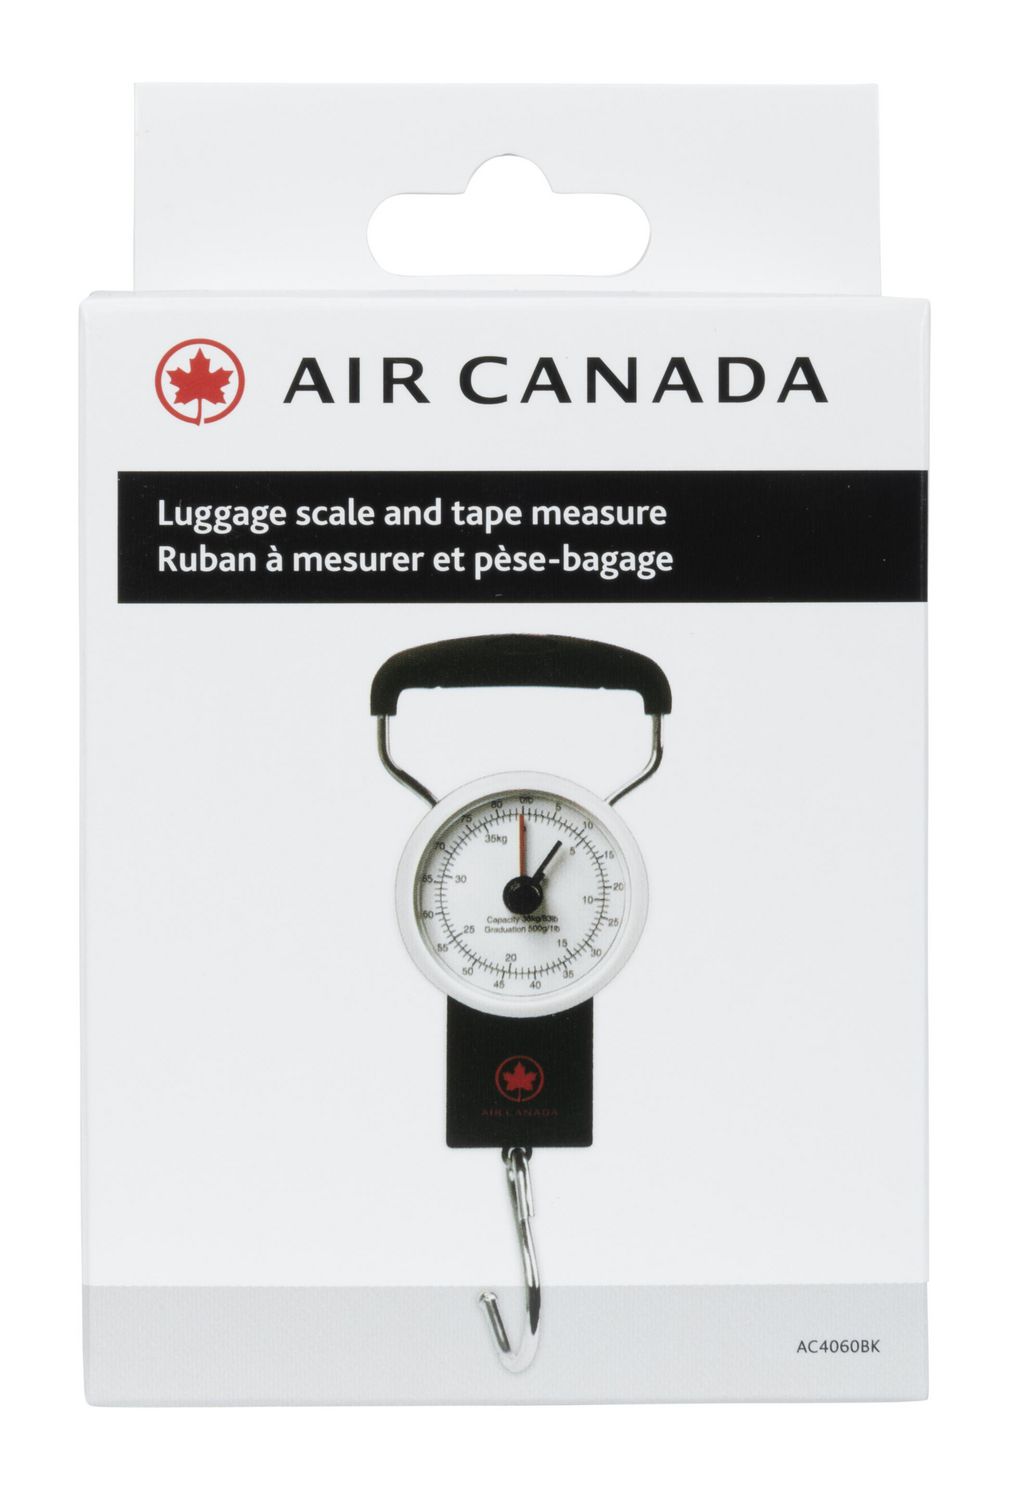 Air Canada 80 Lbs (35 Kg) Luggage Scale And Tape Measure | Walmart Canada